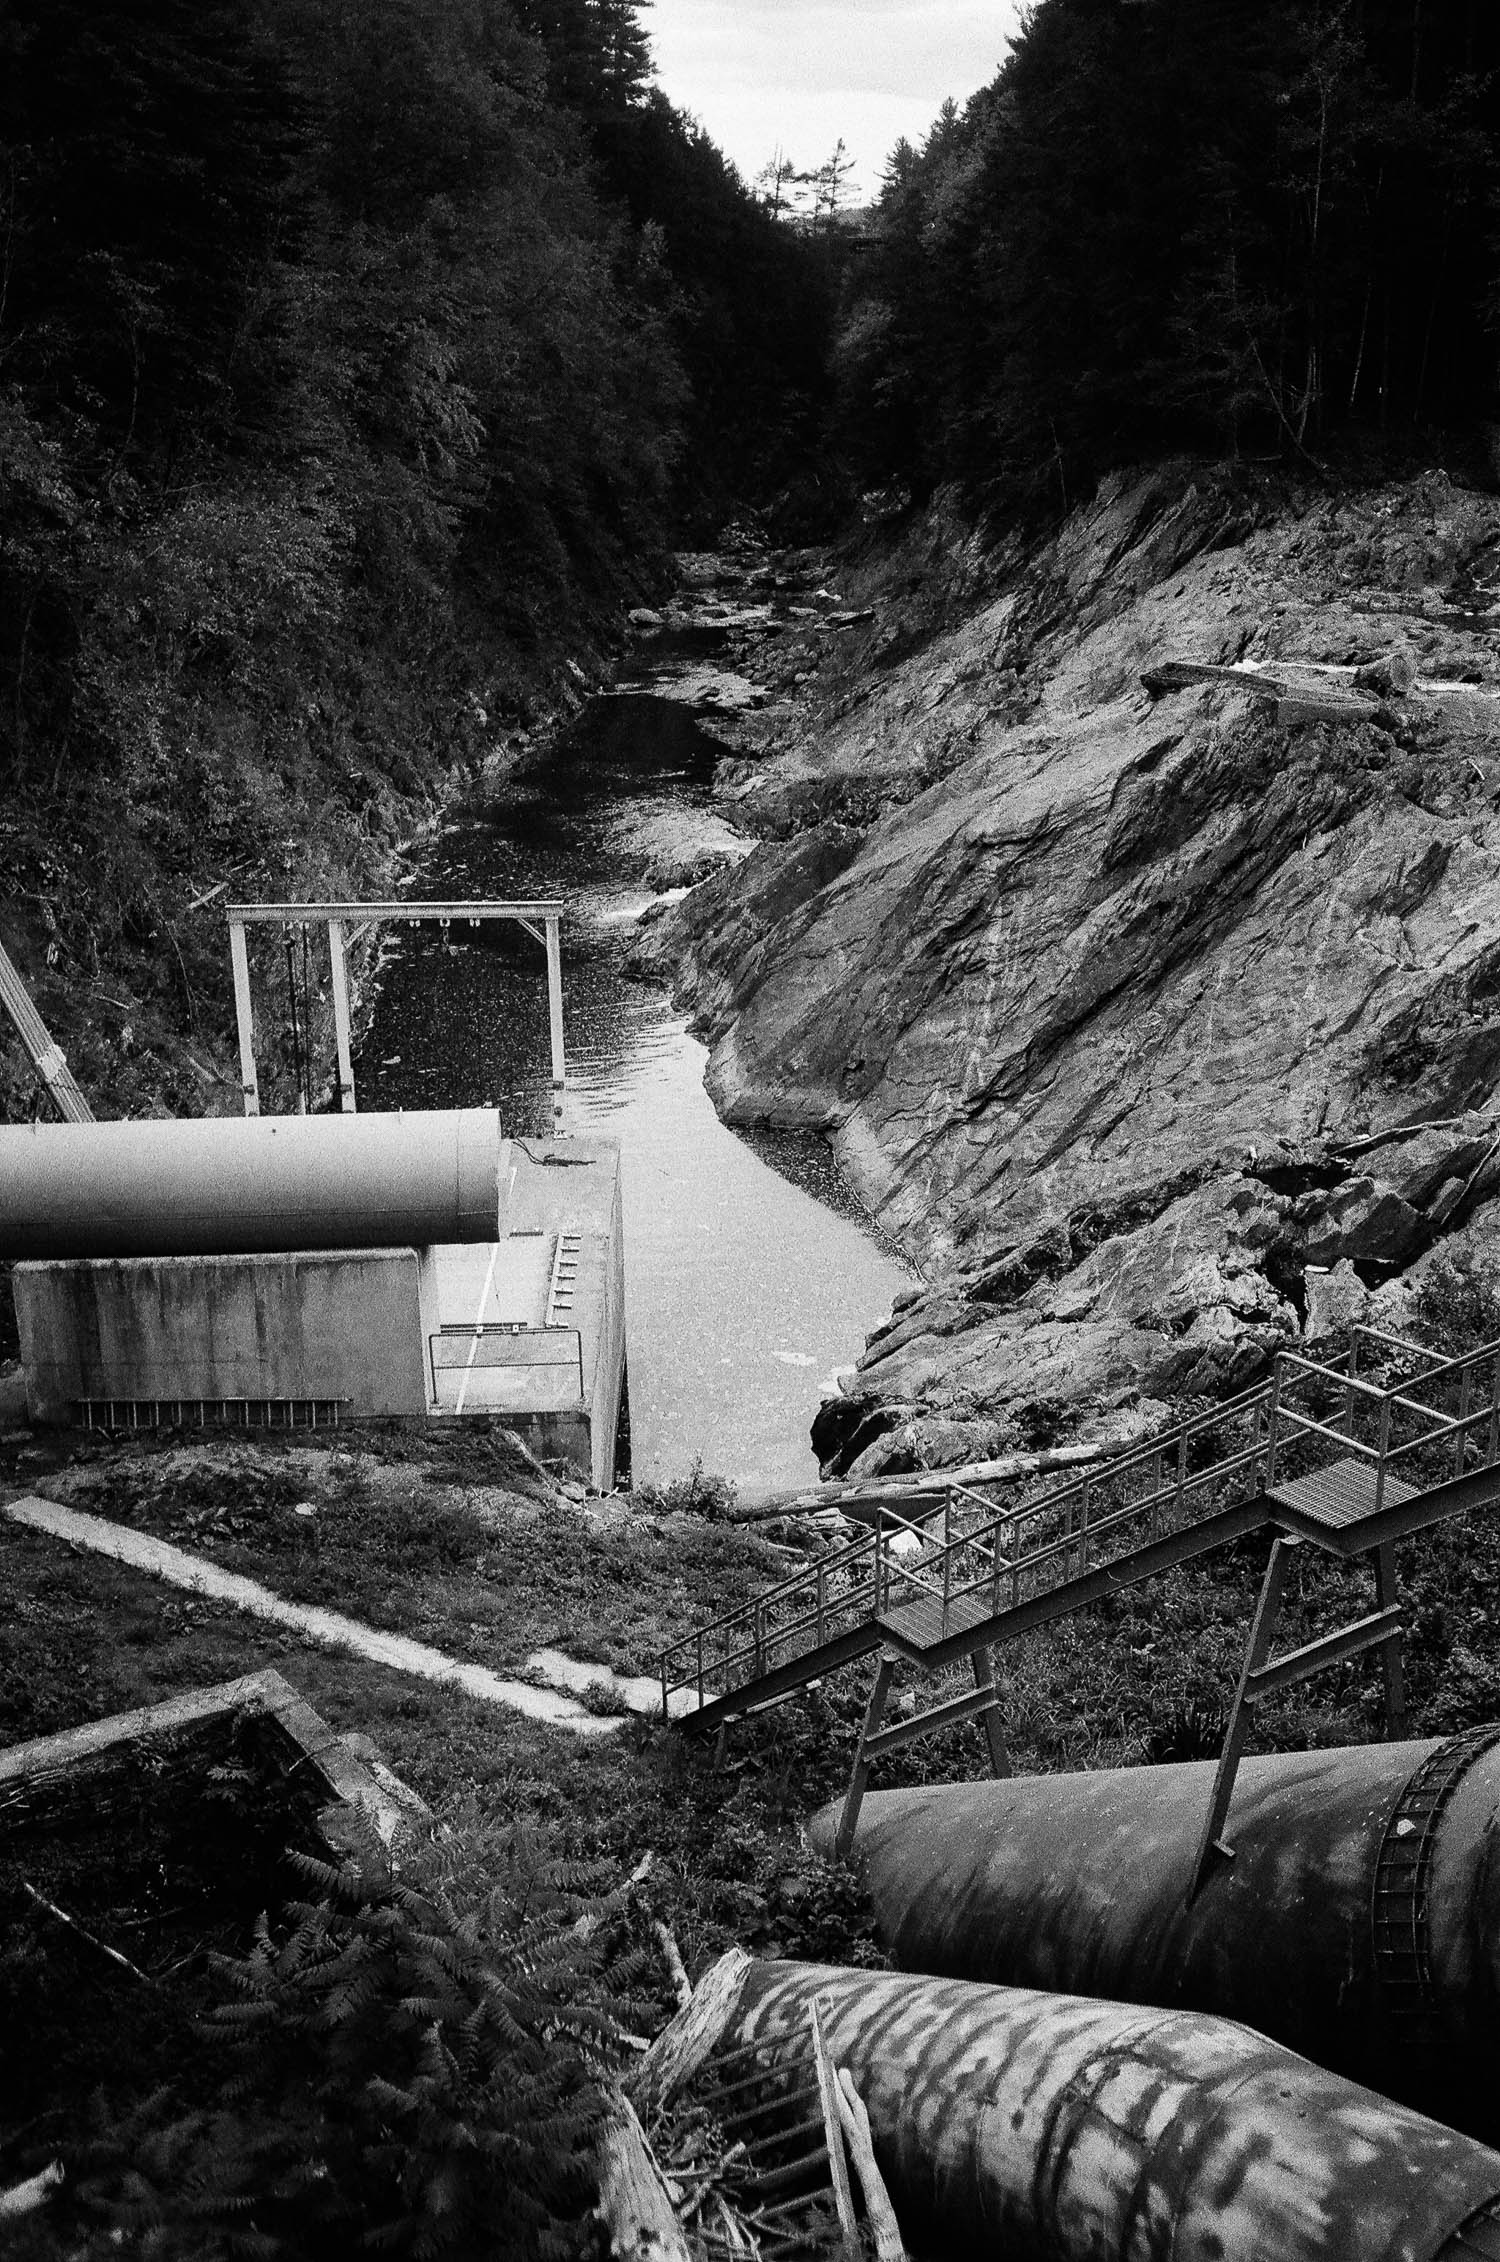 Pipes at Quechee Gorge